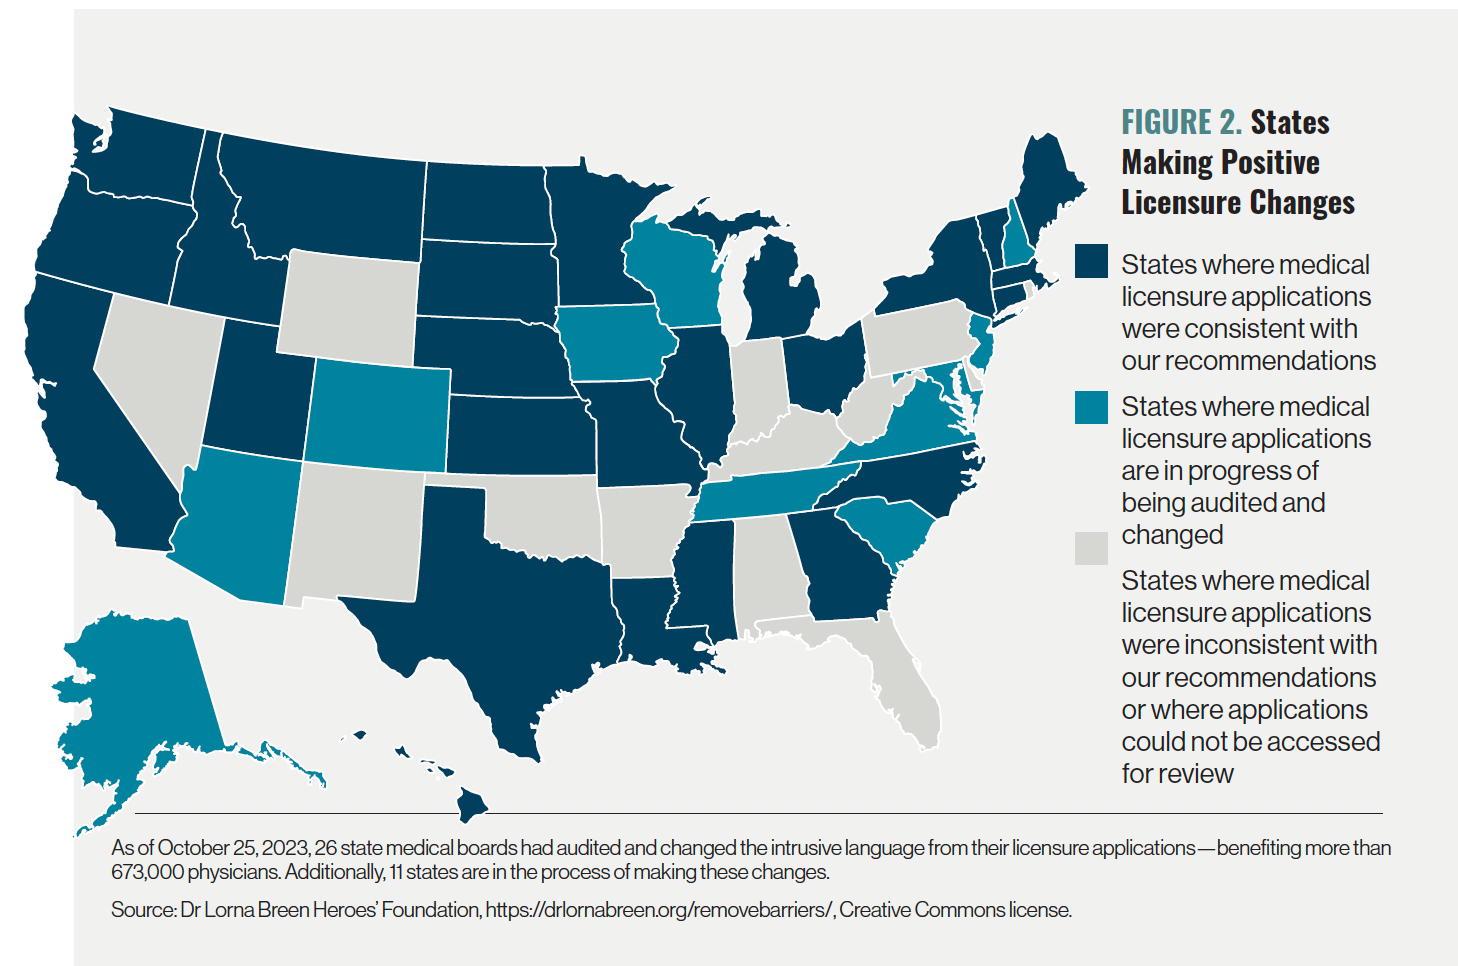 FIGURE 2. States Making Positive Licensure Changes